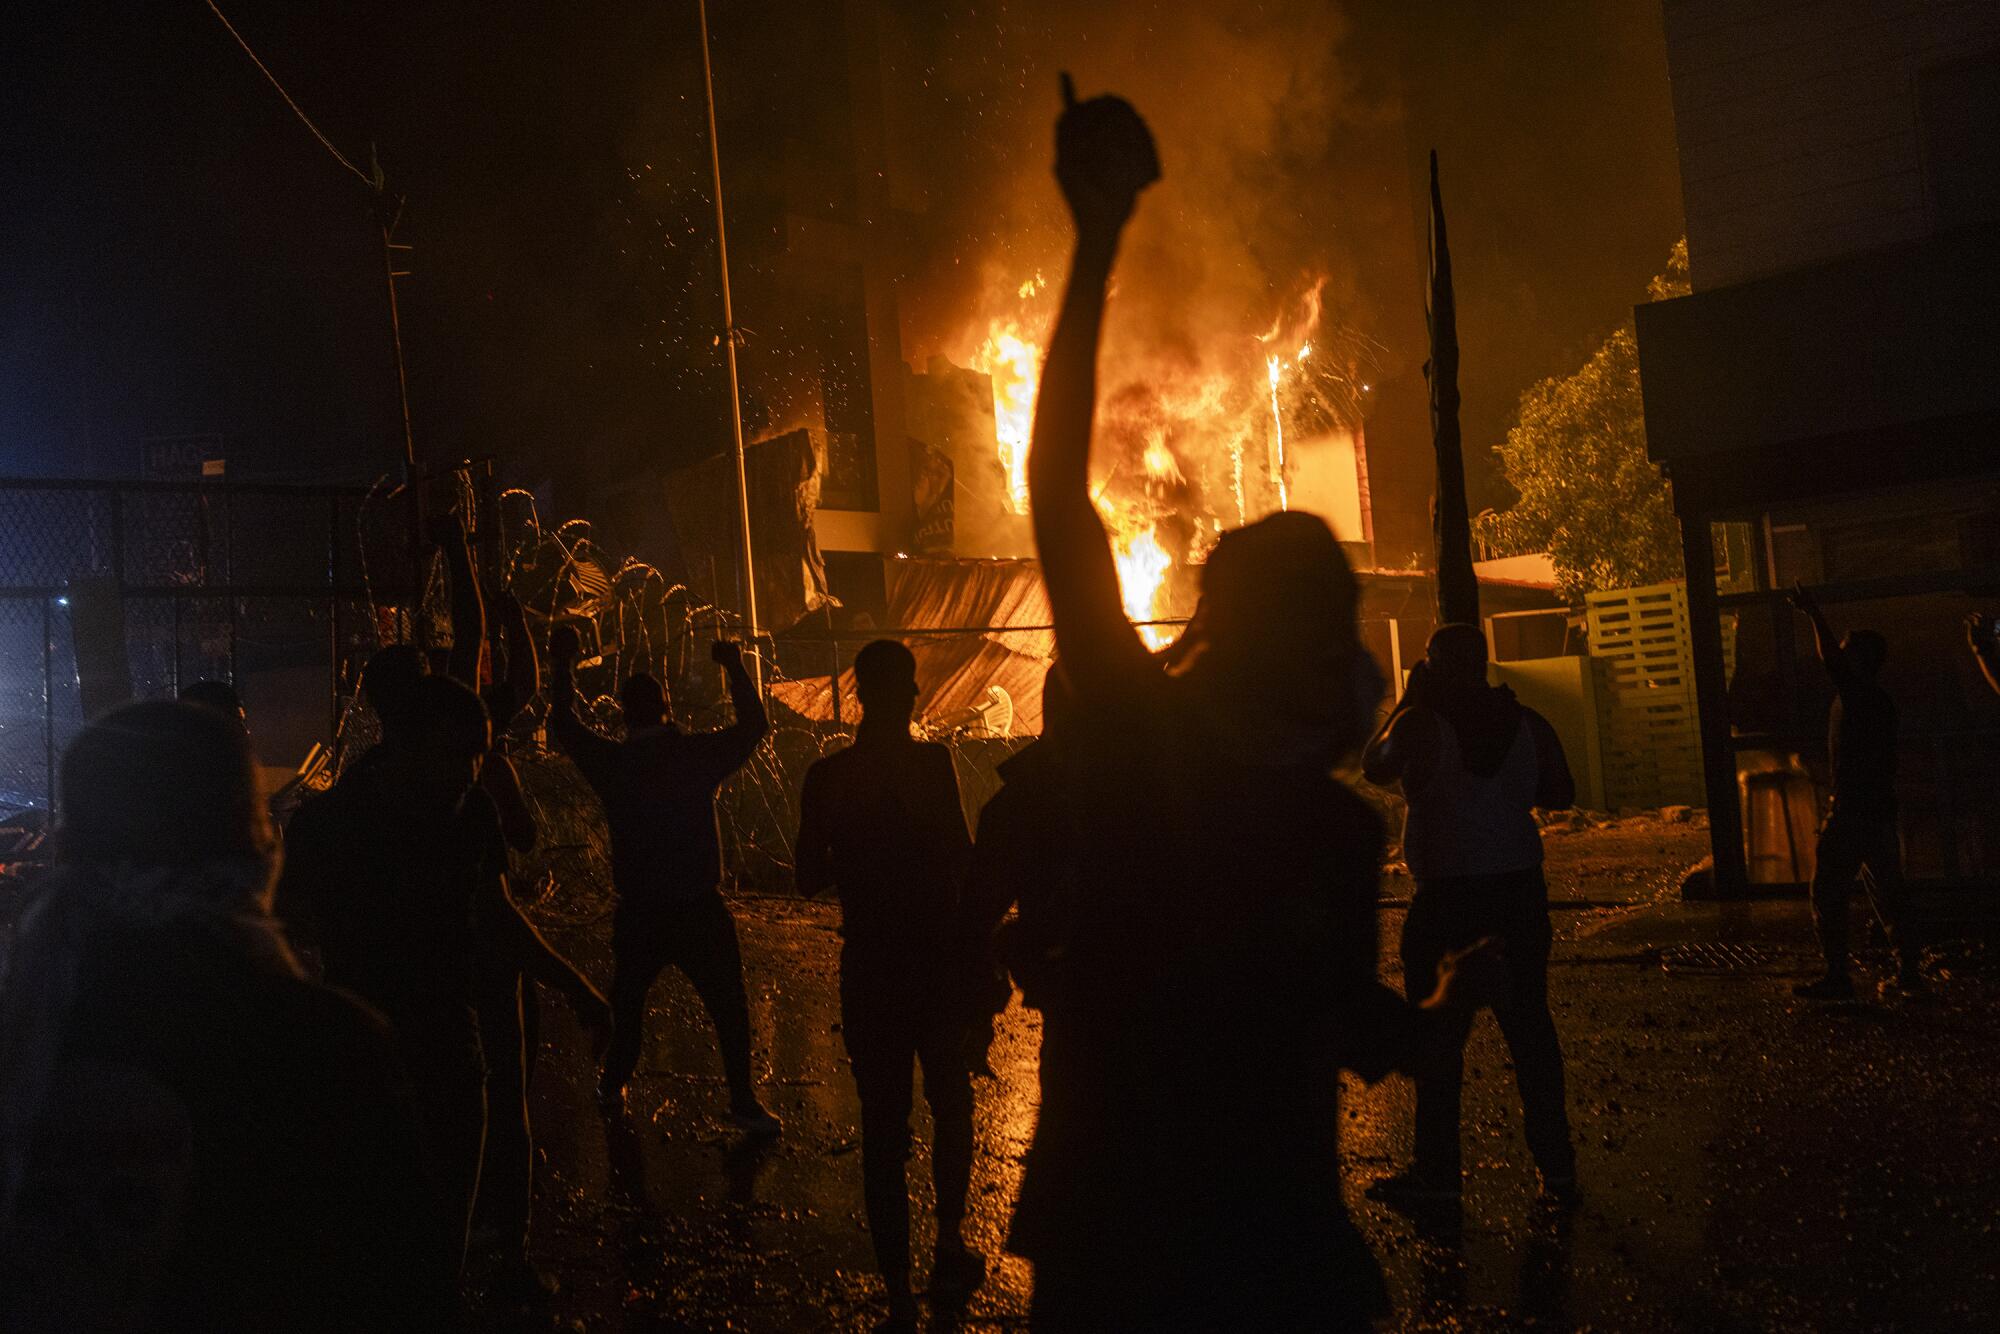 Demonstrators silhouetted at night in front of flames in the distance.